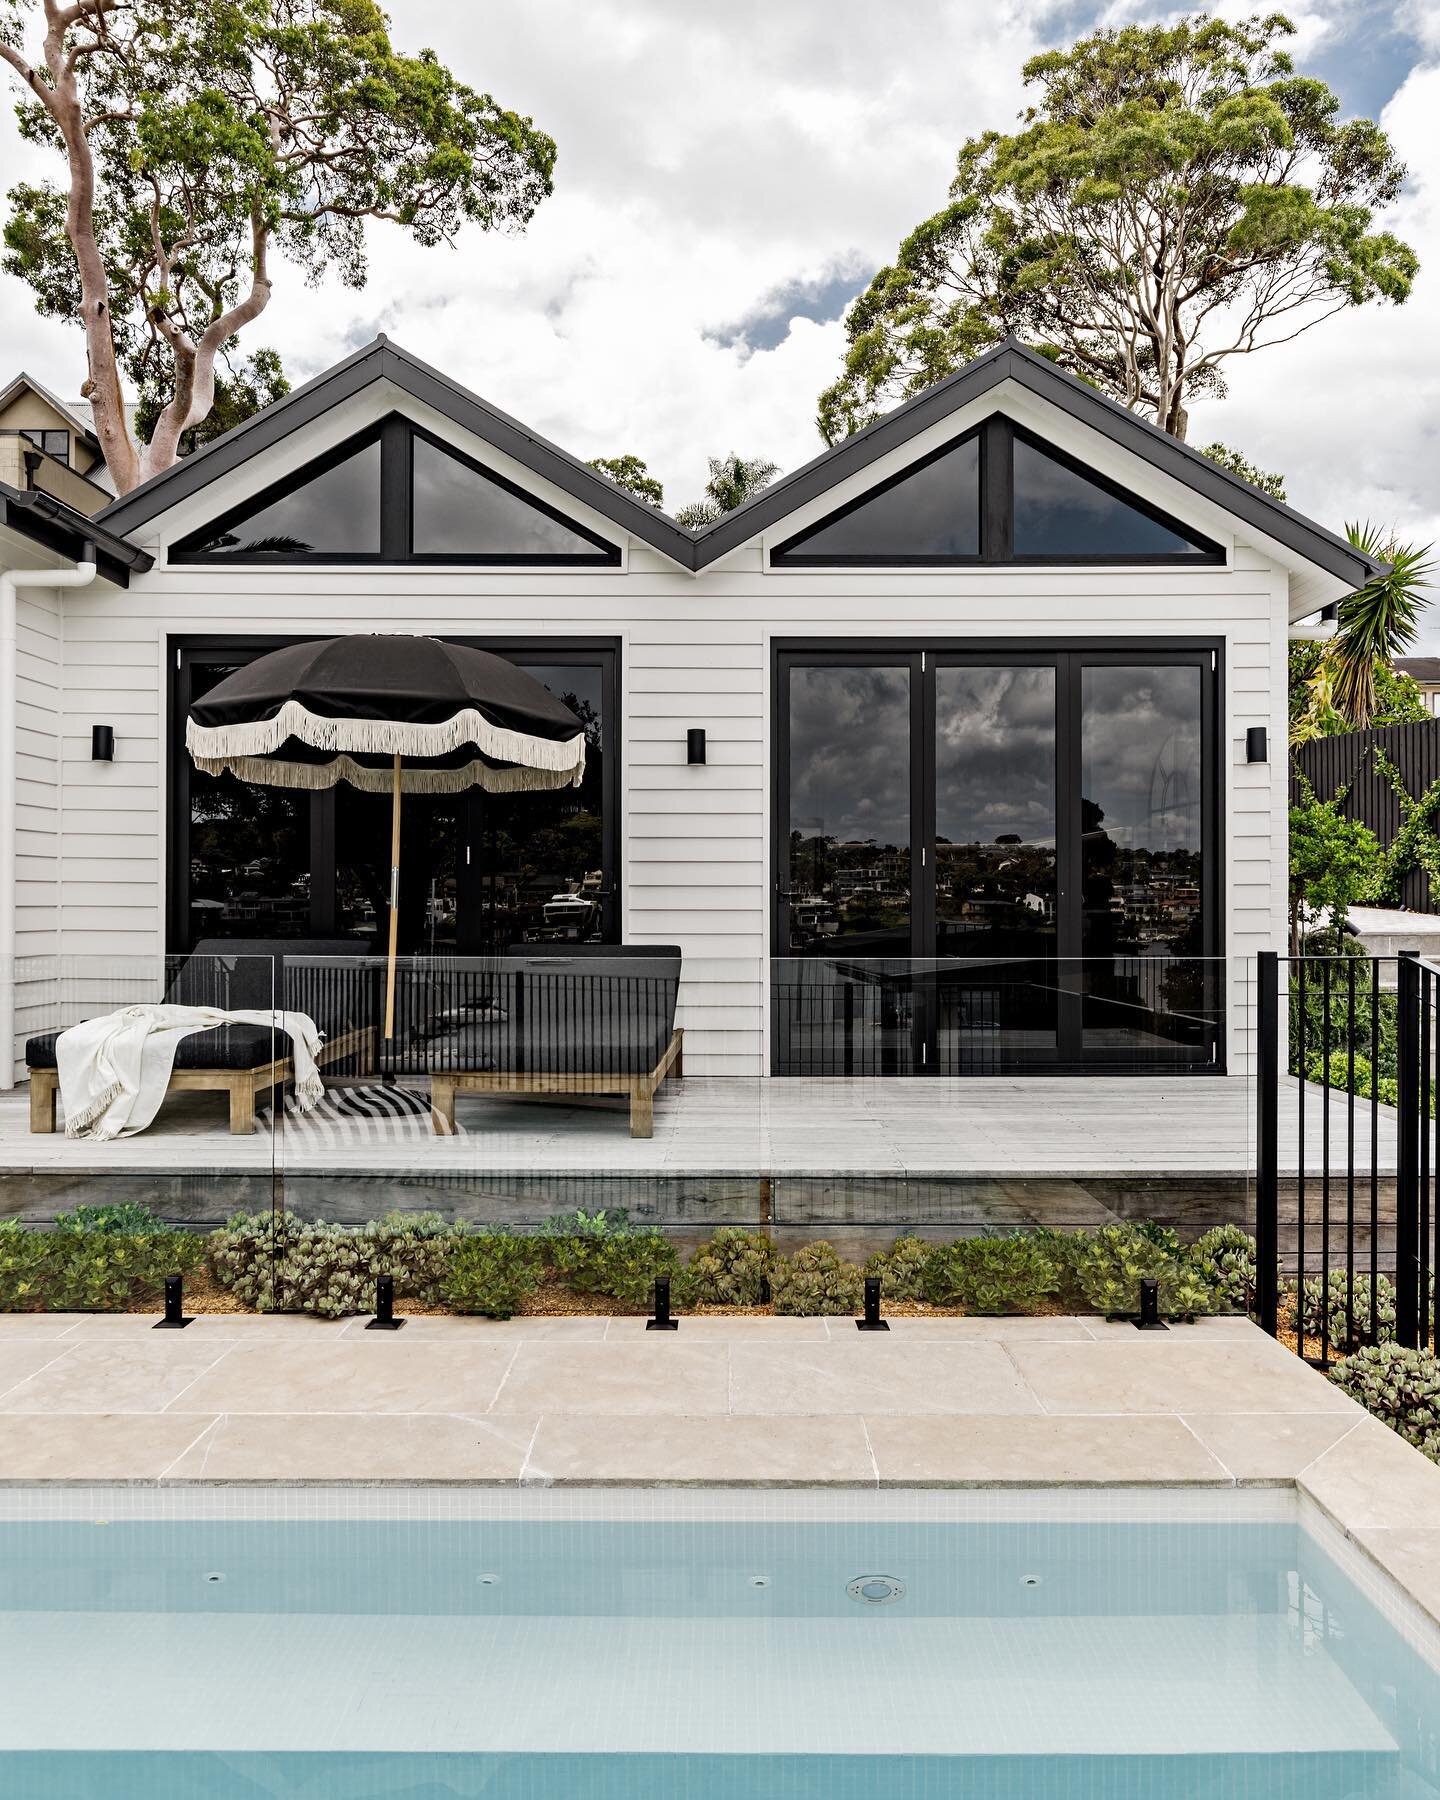 The Pool House at our recently completed Burraneer project, such a beautiful strong monochromatic colour palette that worked so beautifully. With a single bedroom, bathroom, laundry, kitchen and living area this space was designed specifically for gu